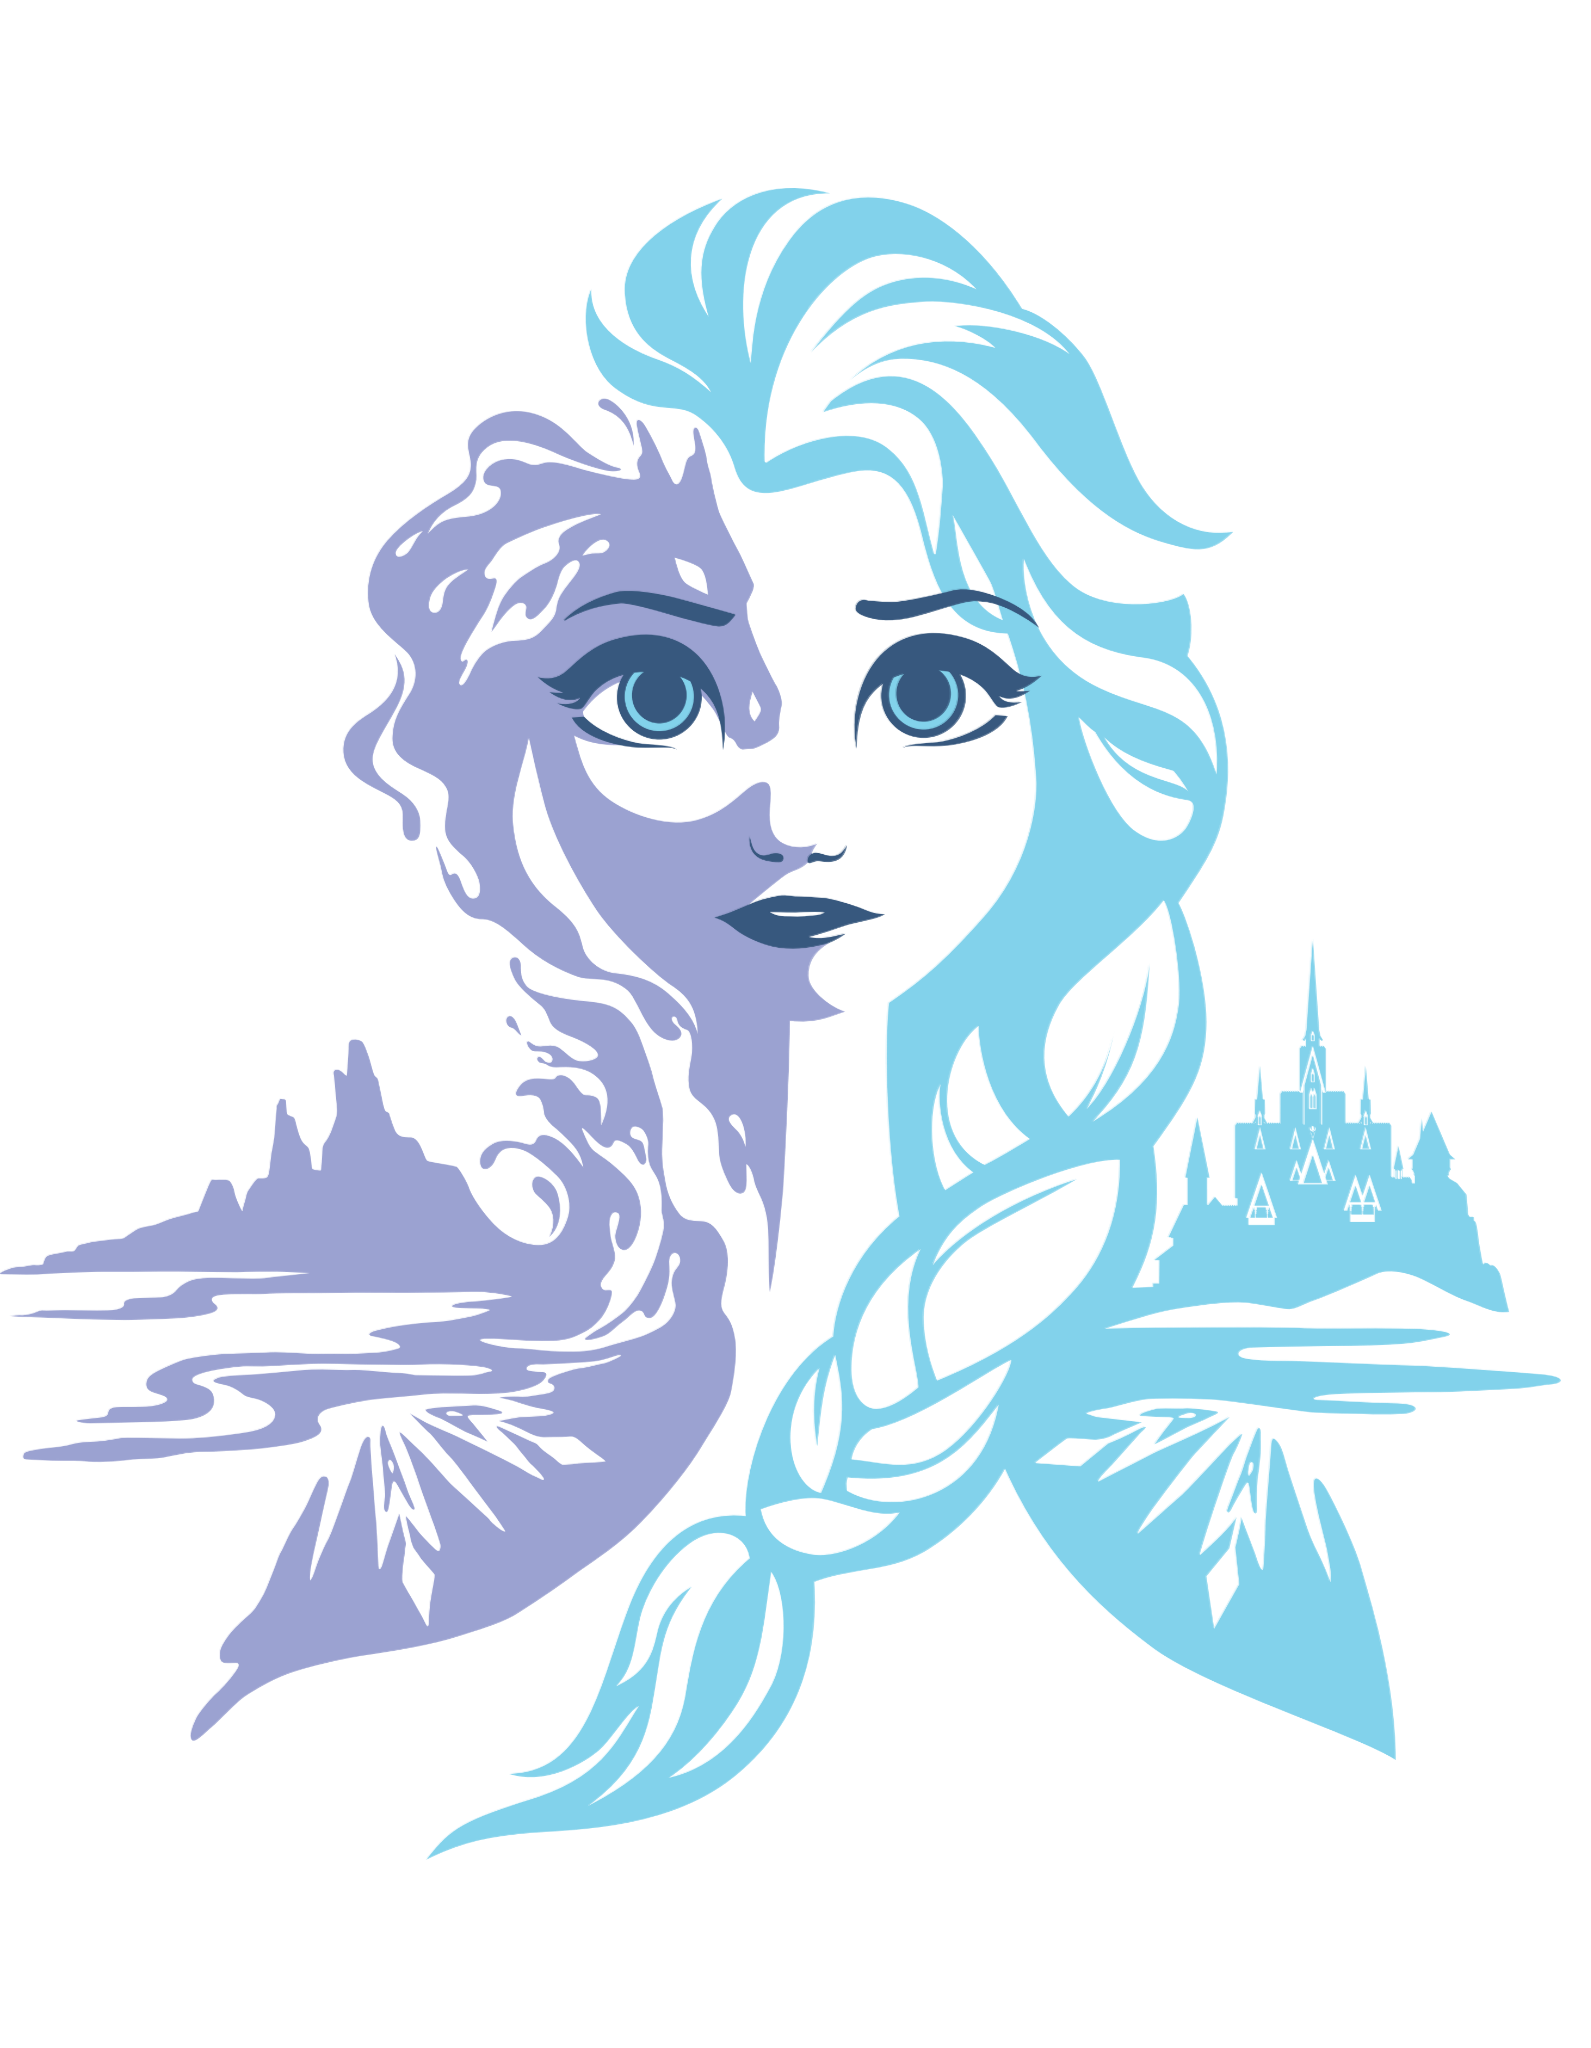 Disney Frozen 2 clipart in png format with a clear background.